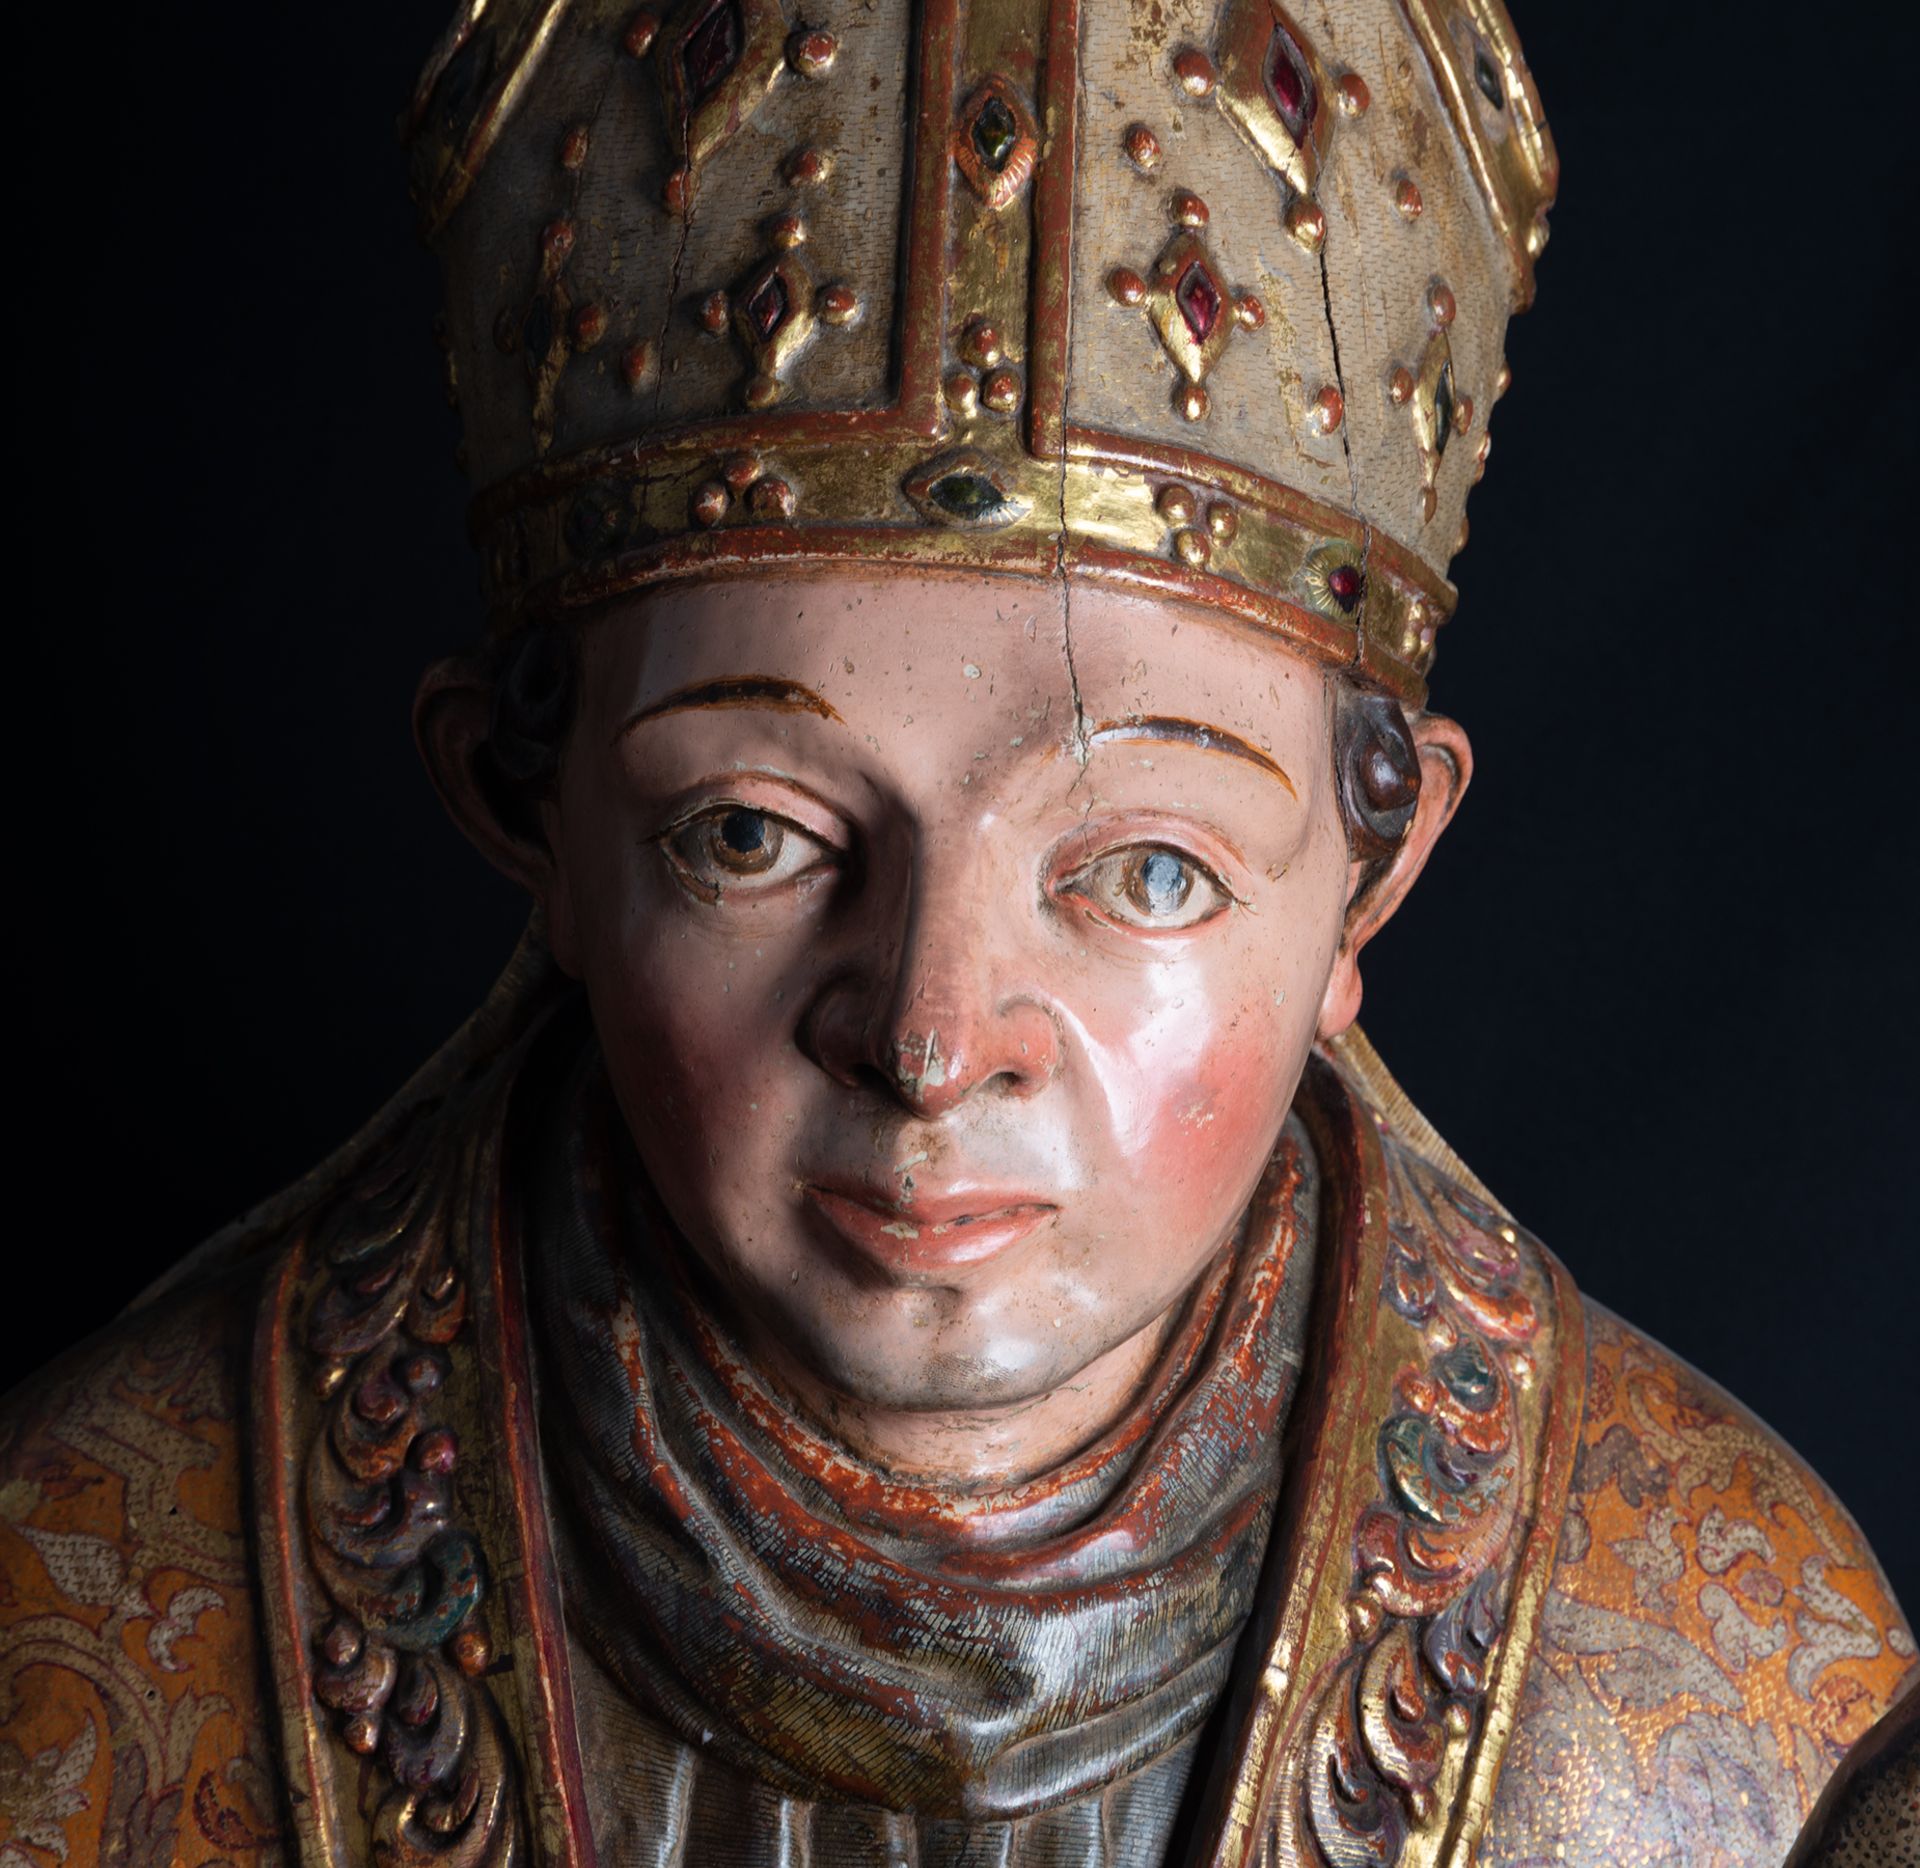 Very Important Life Size Reliquary Bust of Bishop, Spanish Renaissance school of the 16th century - Image 5 of 9